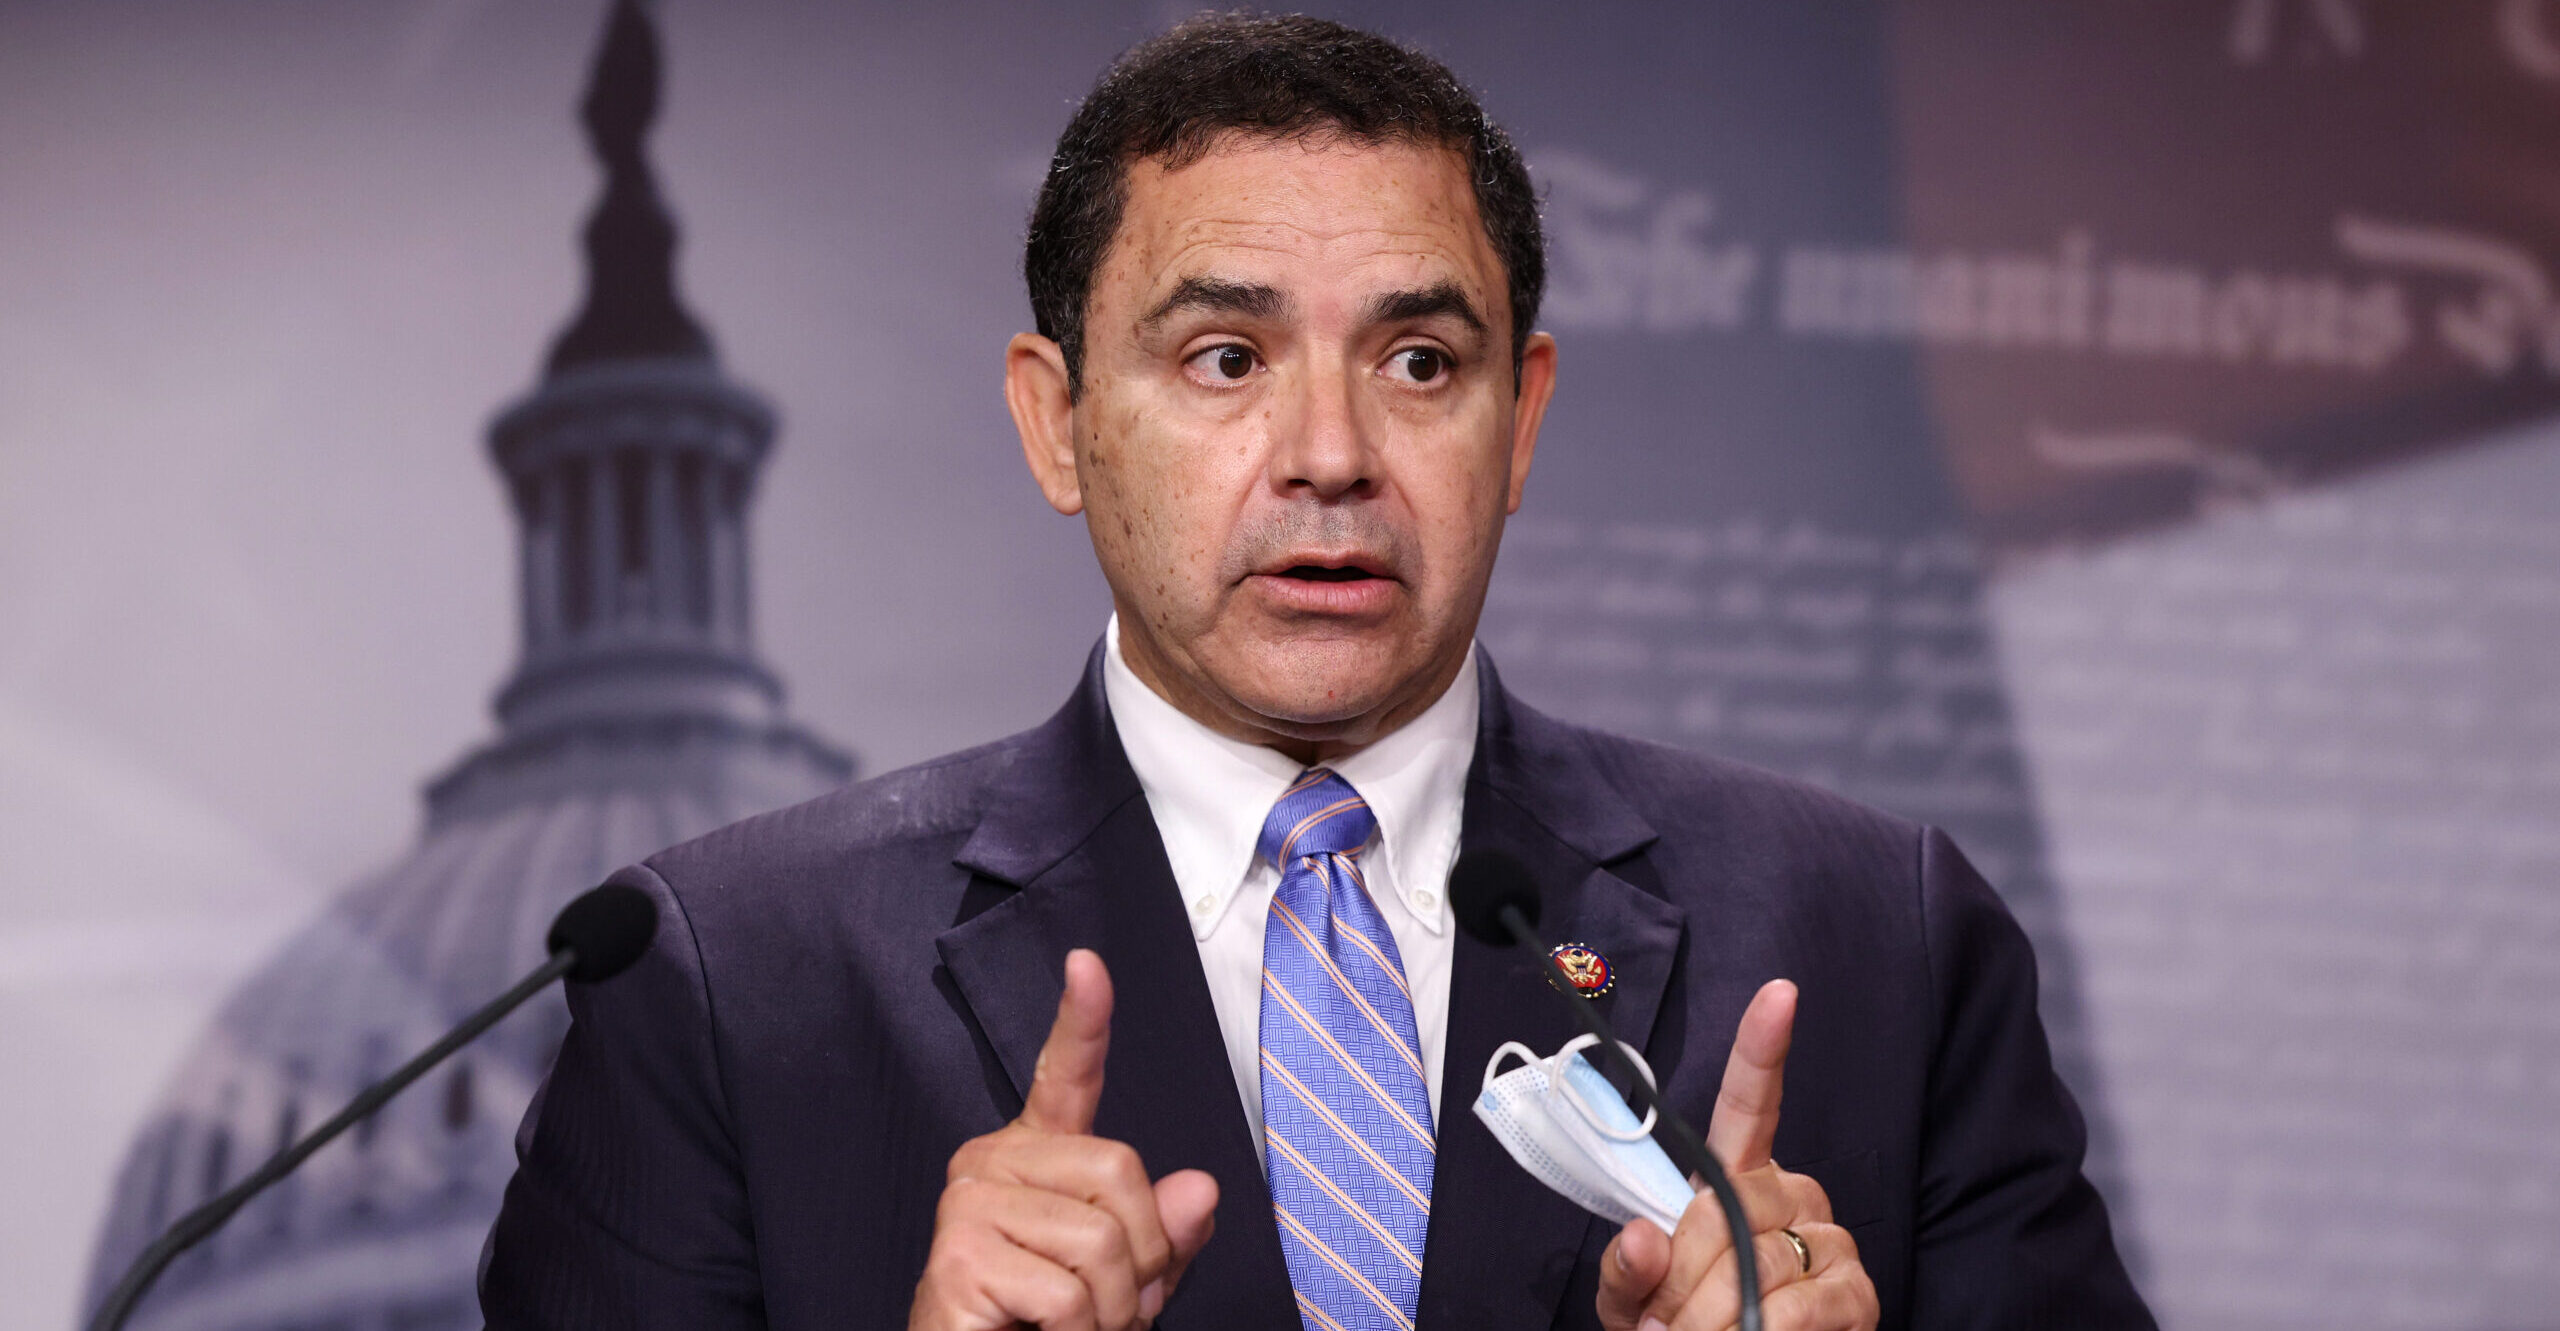 Just 177 Votes Ahead, Pro-Life Democrat Henry Cuellar Declares Victory Over Progressive Challenger – But a Recount Is All But Certain